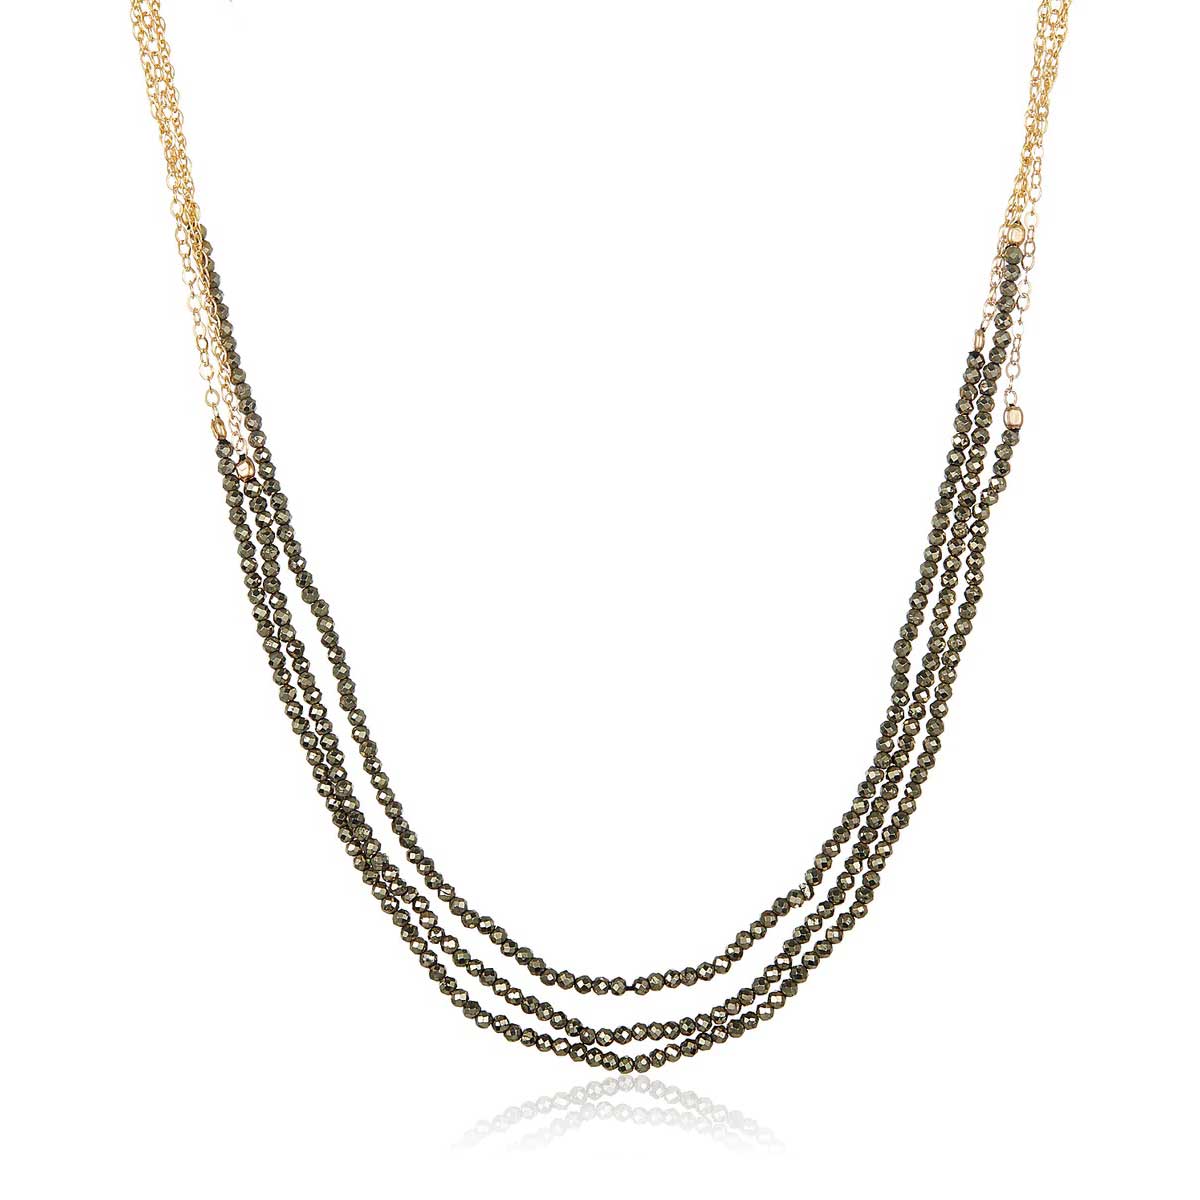 Spiked and Sparkly Punk Double-Strand Necklace – Jane Daisy